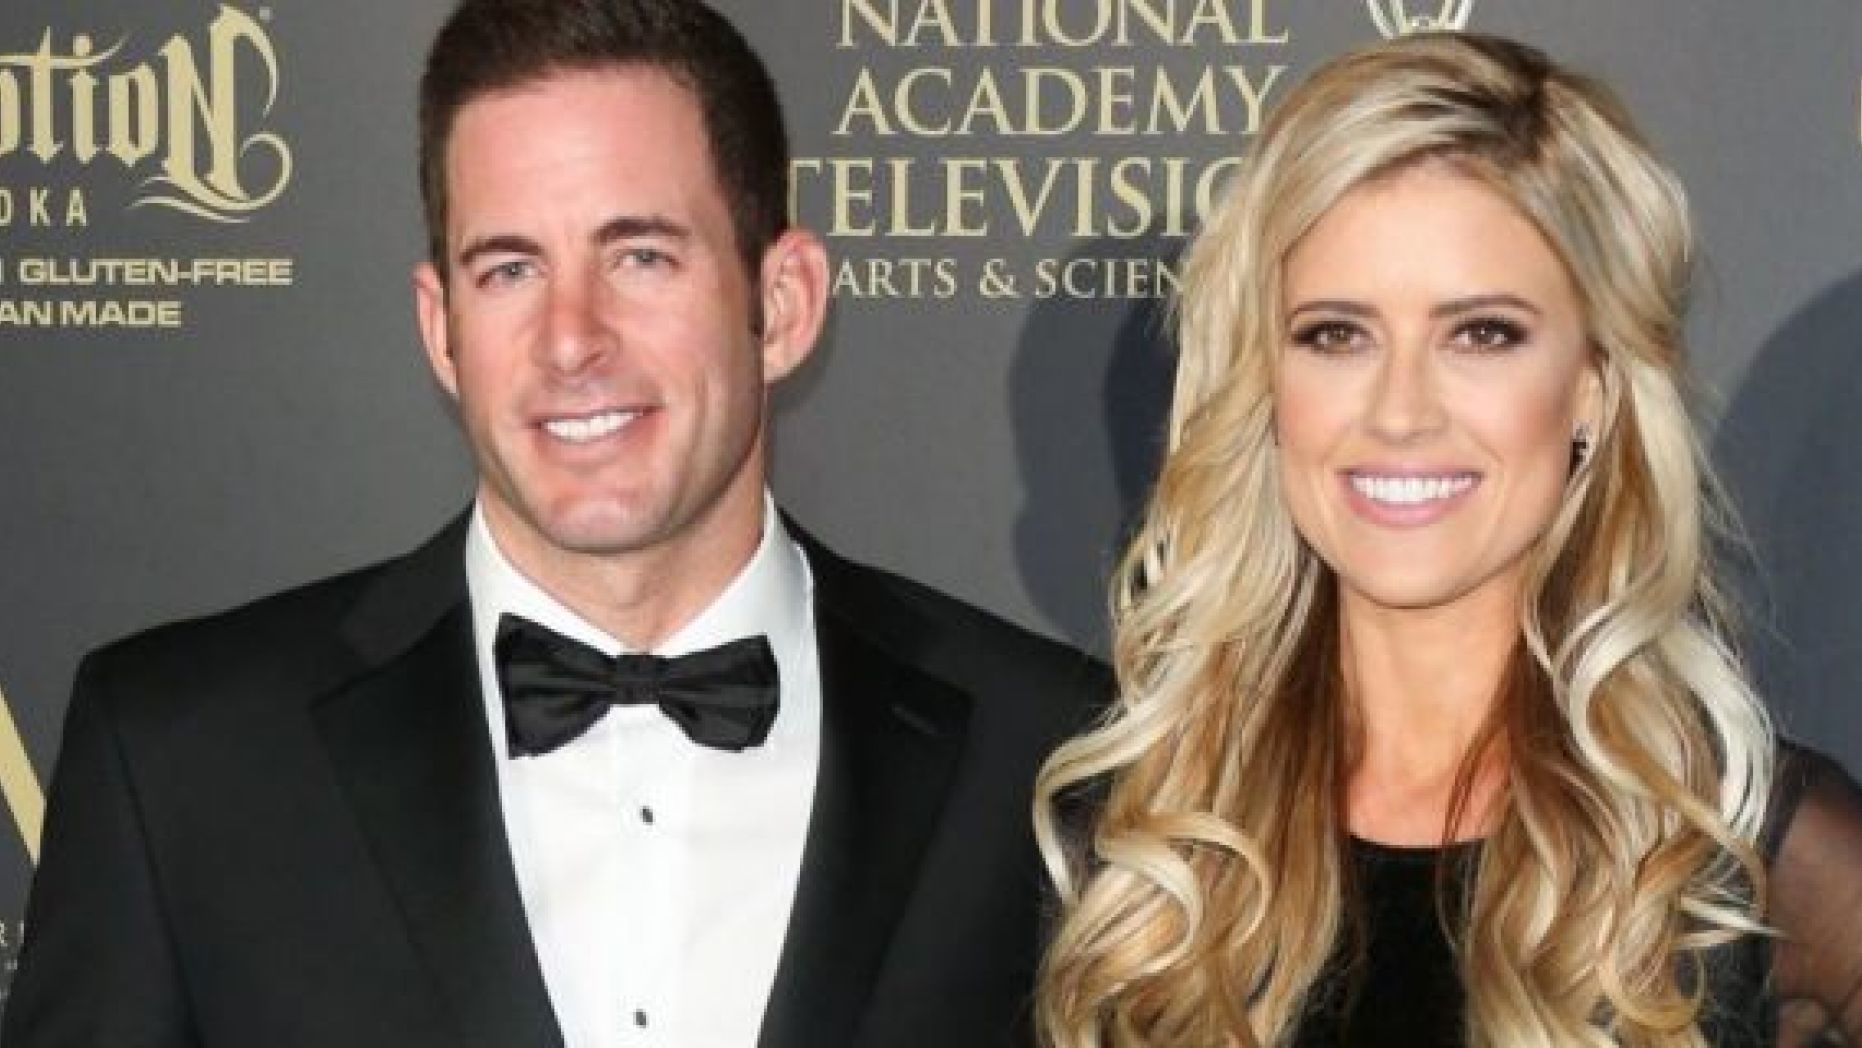 "Flip or Flop" director, Michael Pando, opened up about an on-set fight Tarek and Christina El Moussa had on the HGTV series.